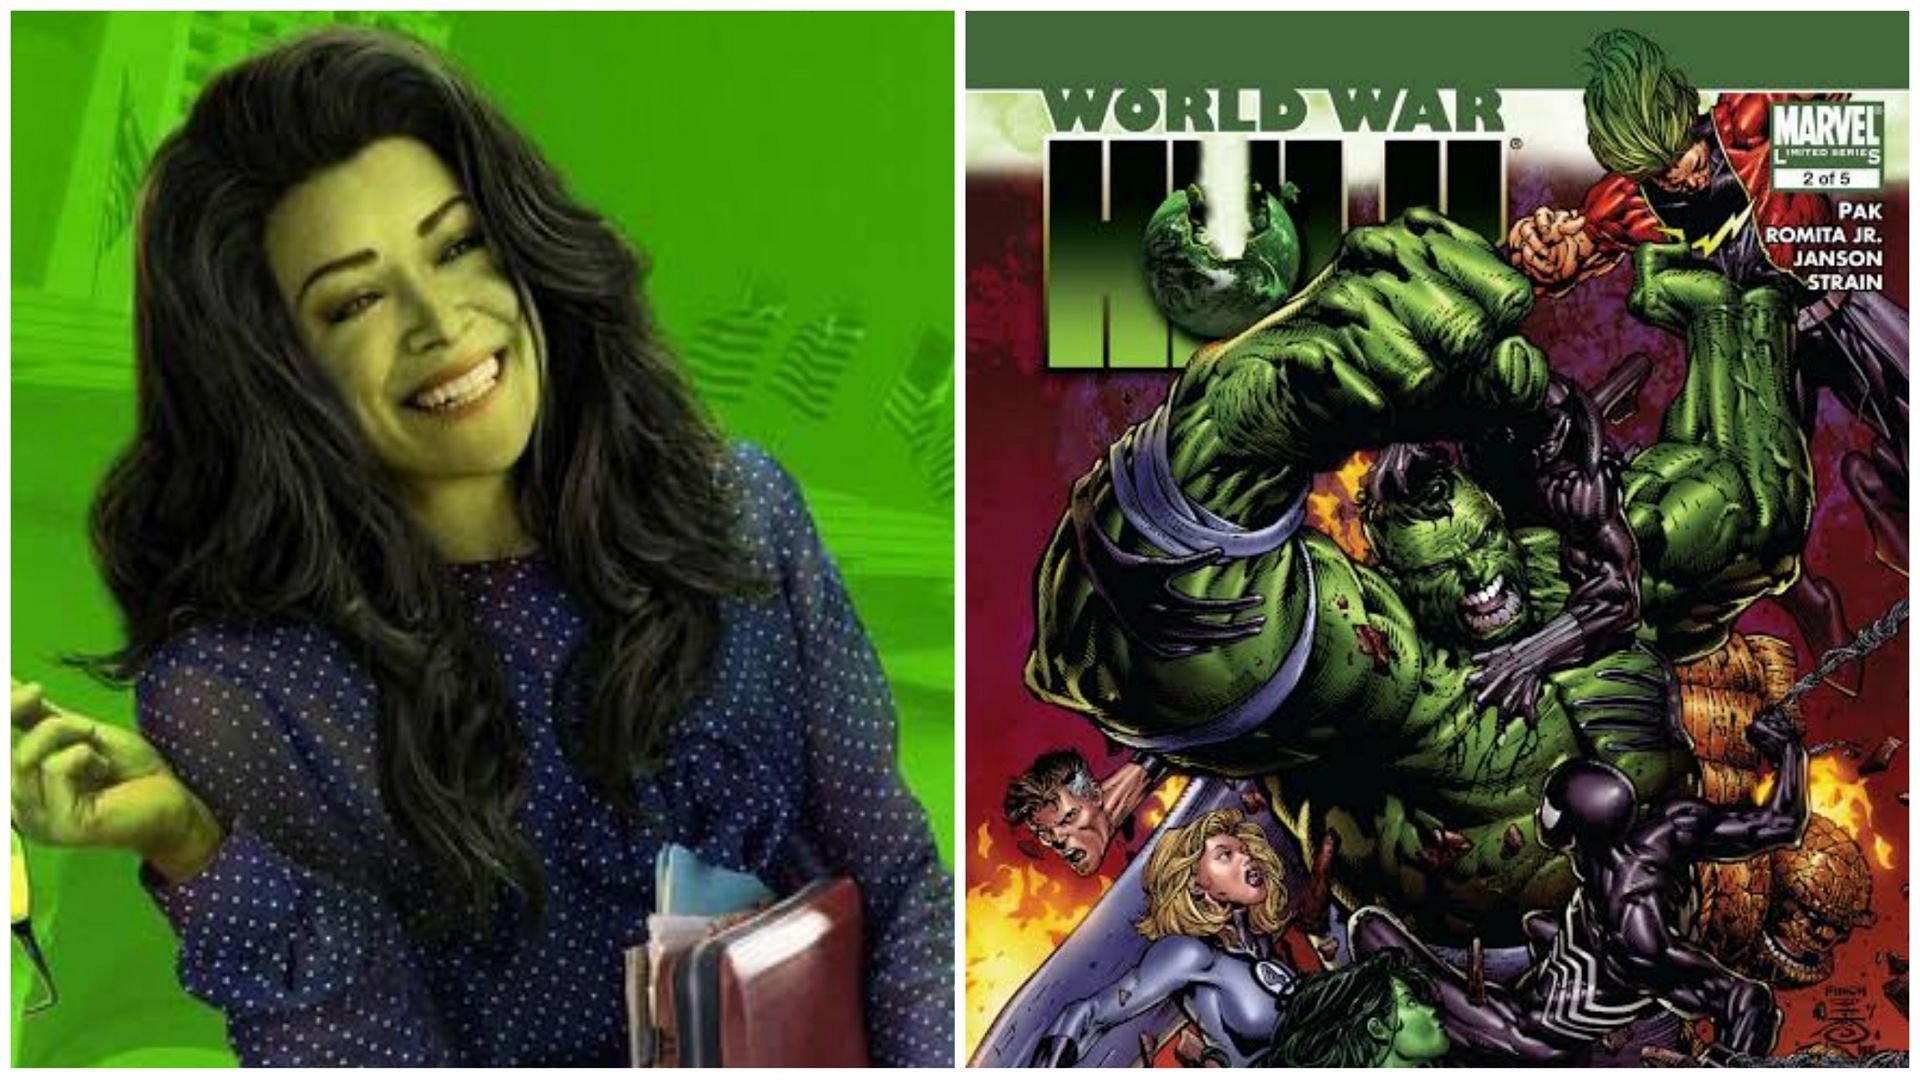 She-Hulk: Attorney at Law poster and World War Hulk comic cover (Images via Marvel Studios and Marvel Comics)